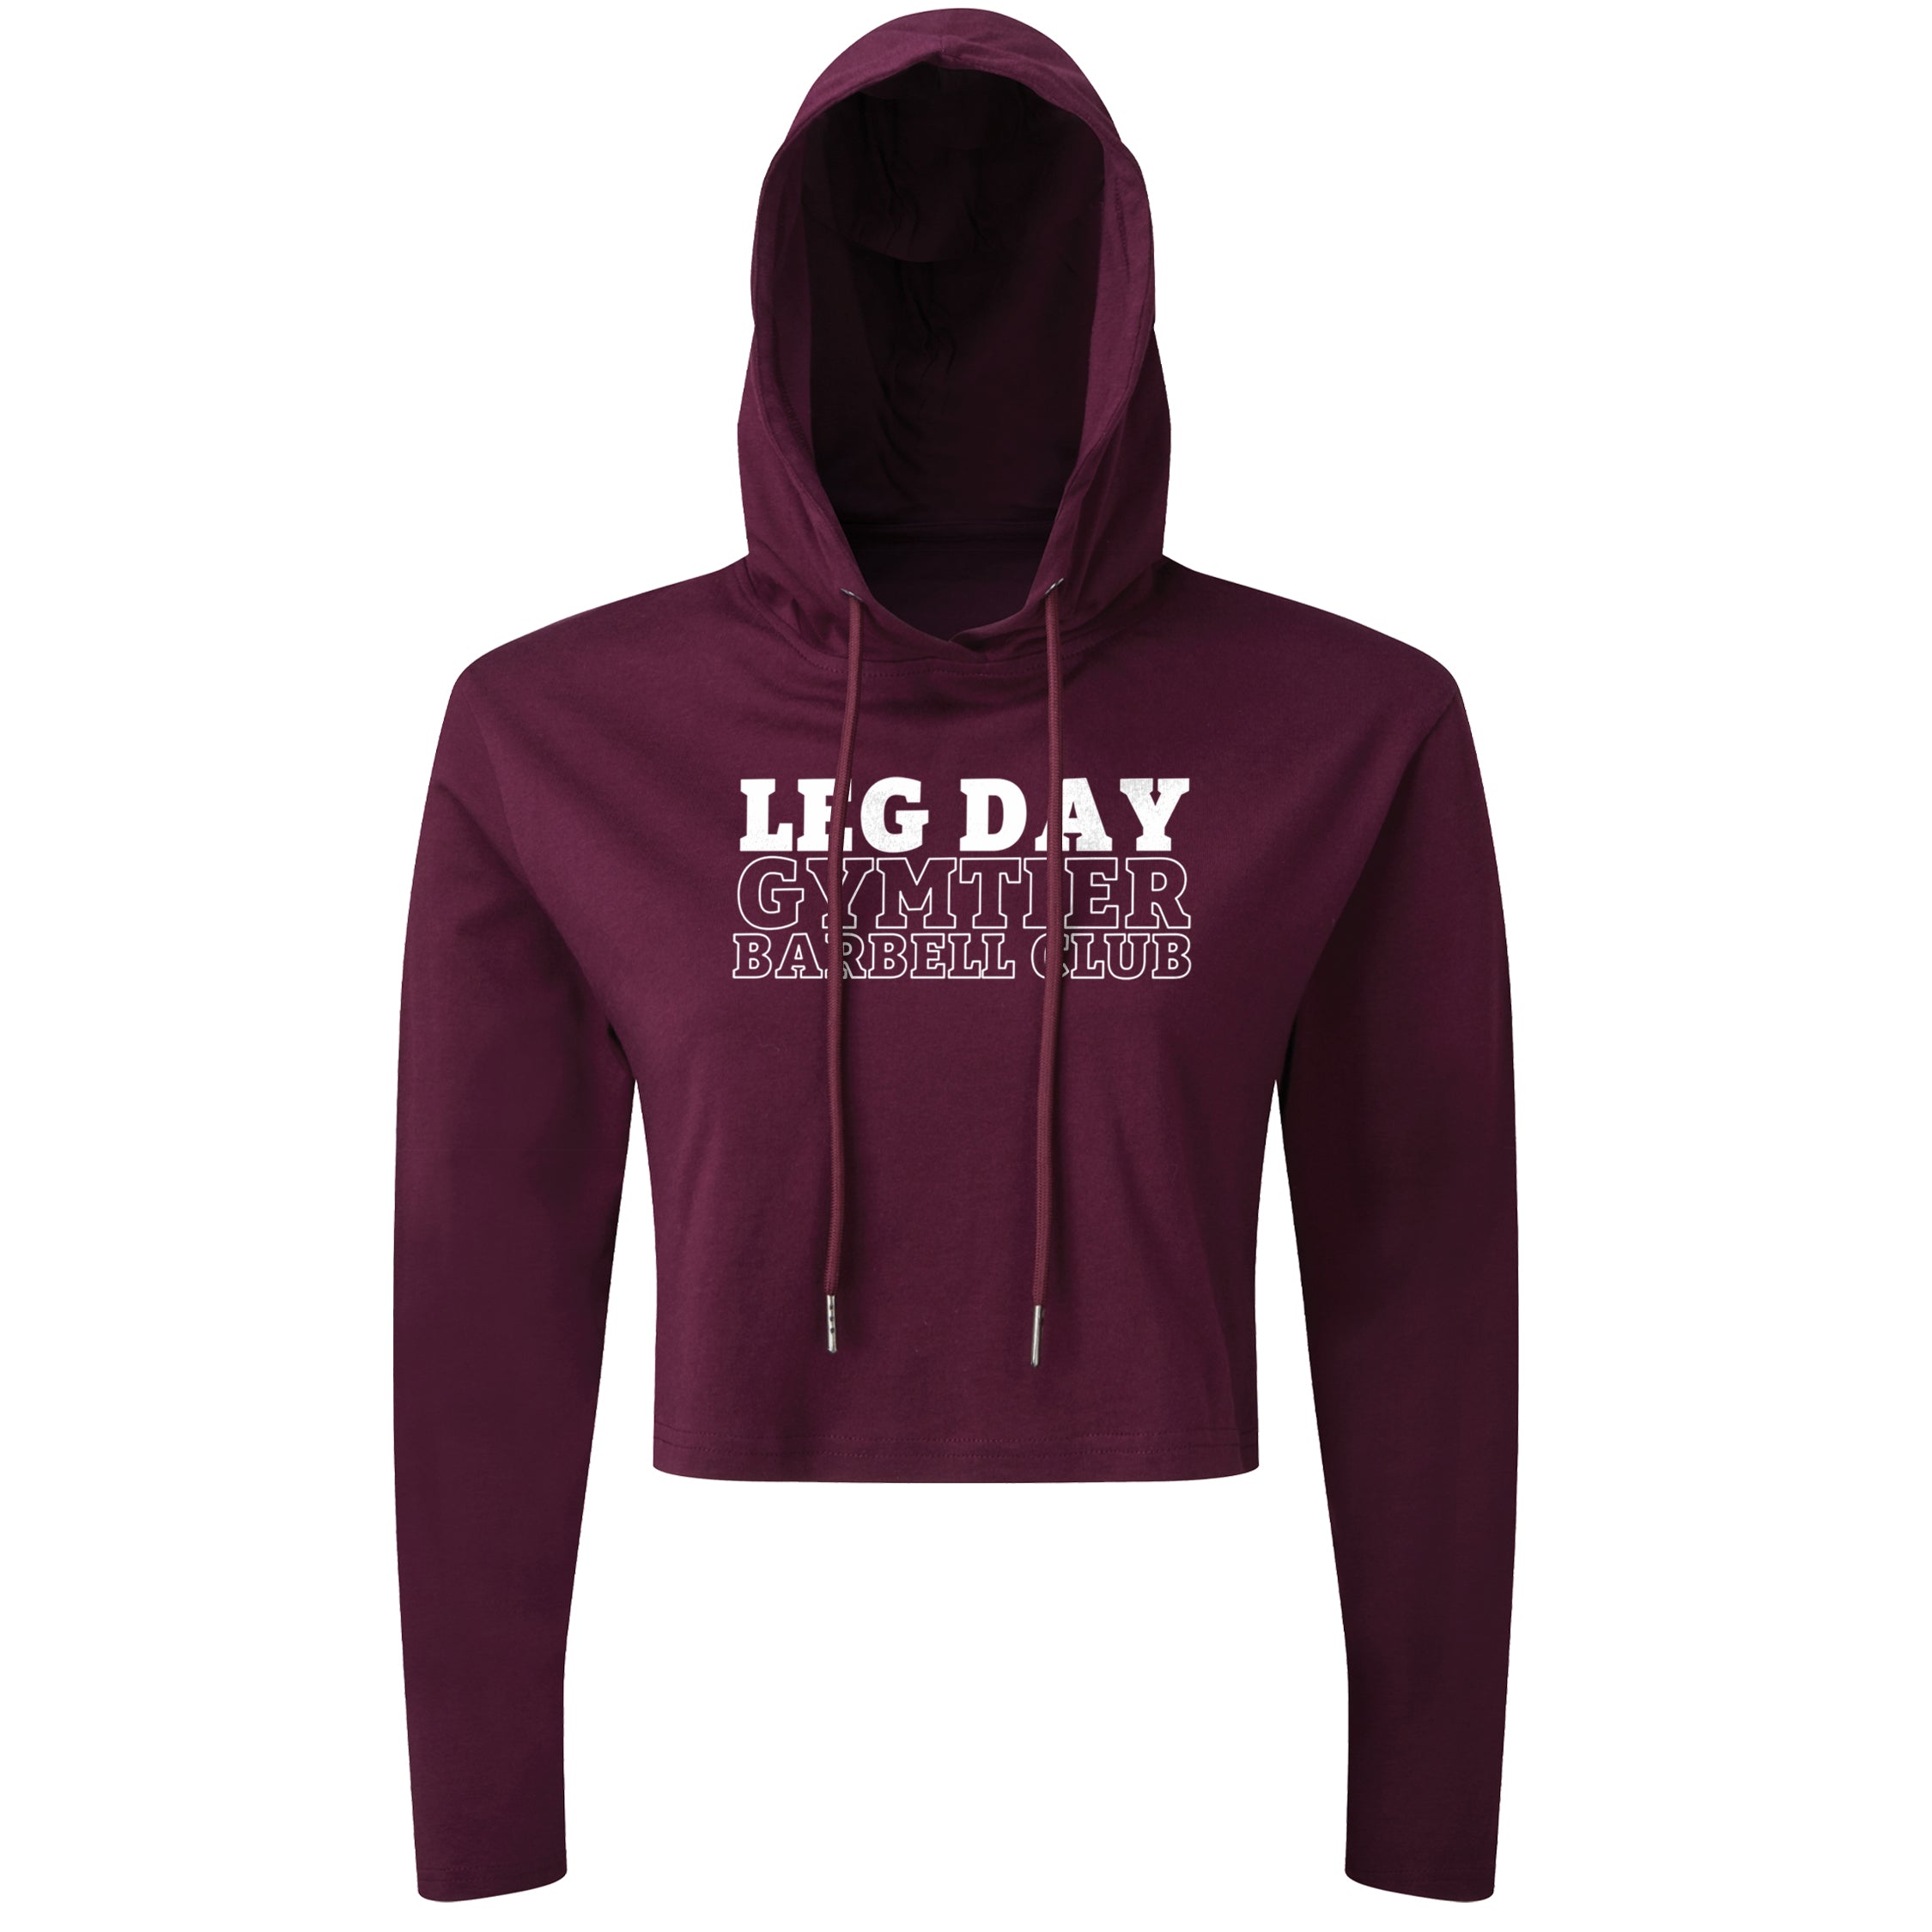 Gymtier Barbell Club - Leg Day - Cropped Hoodie